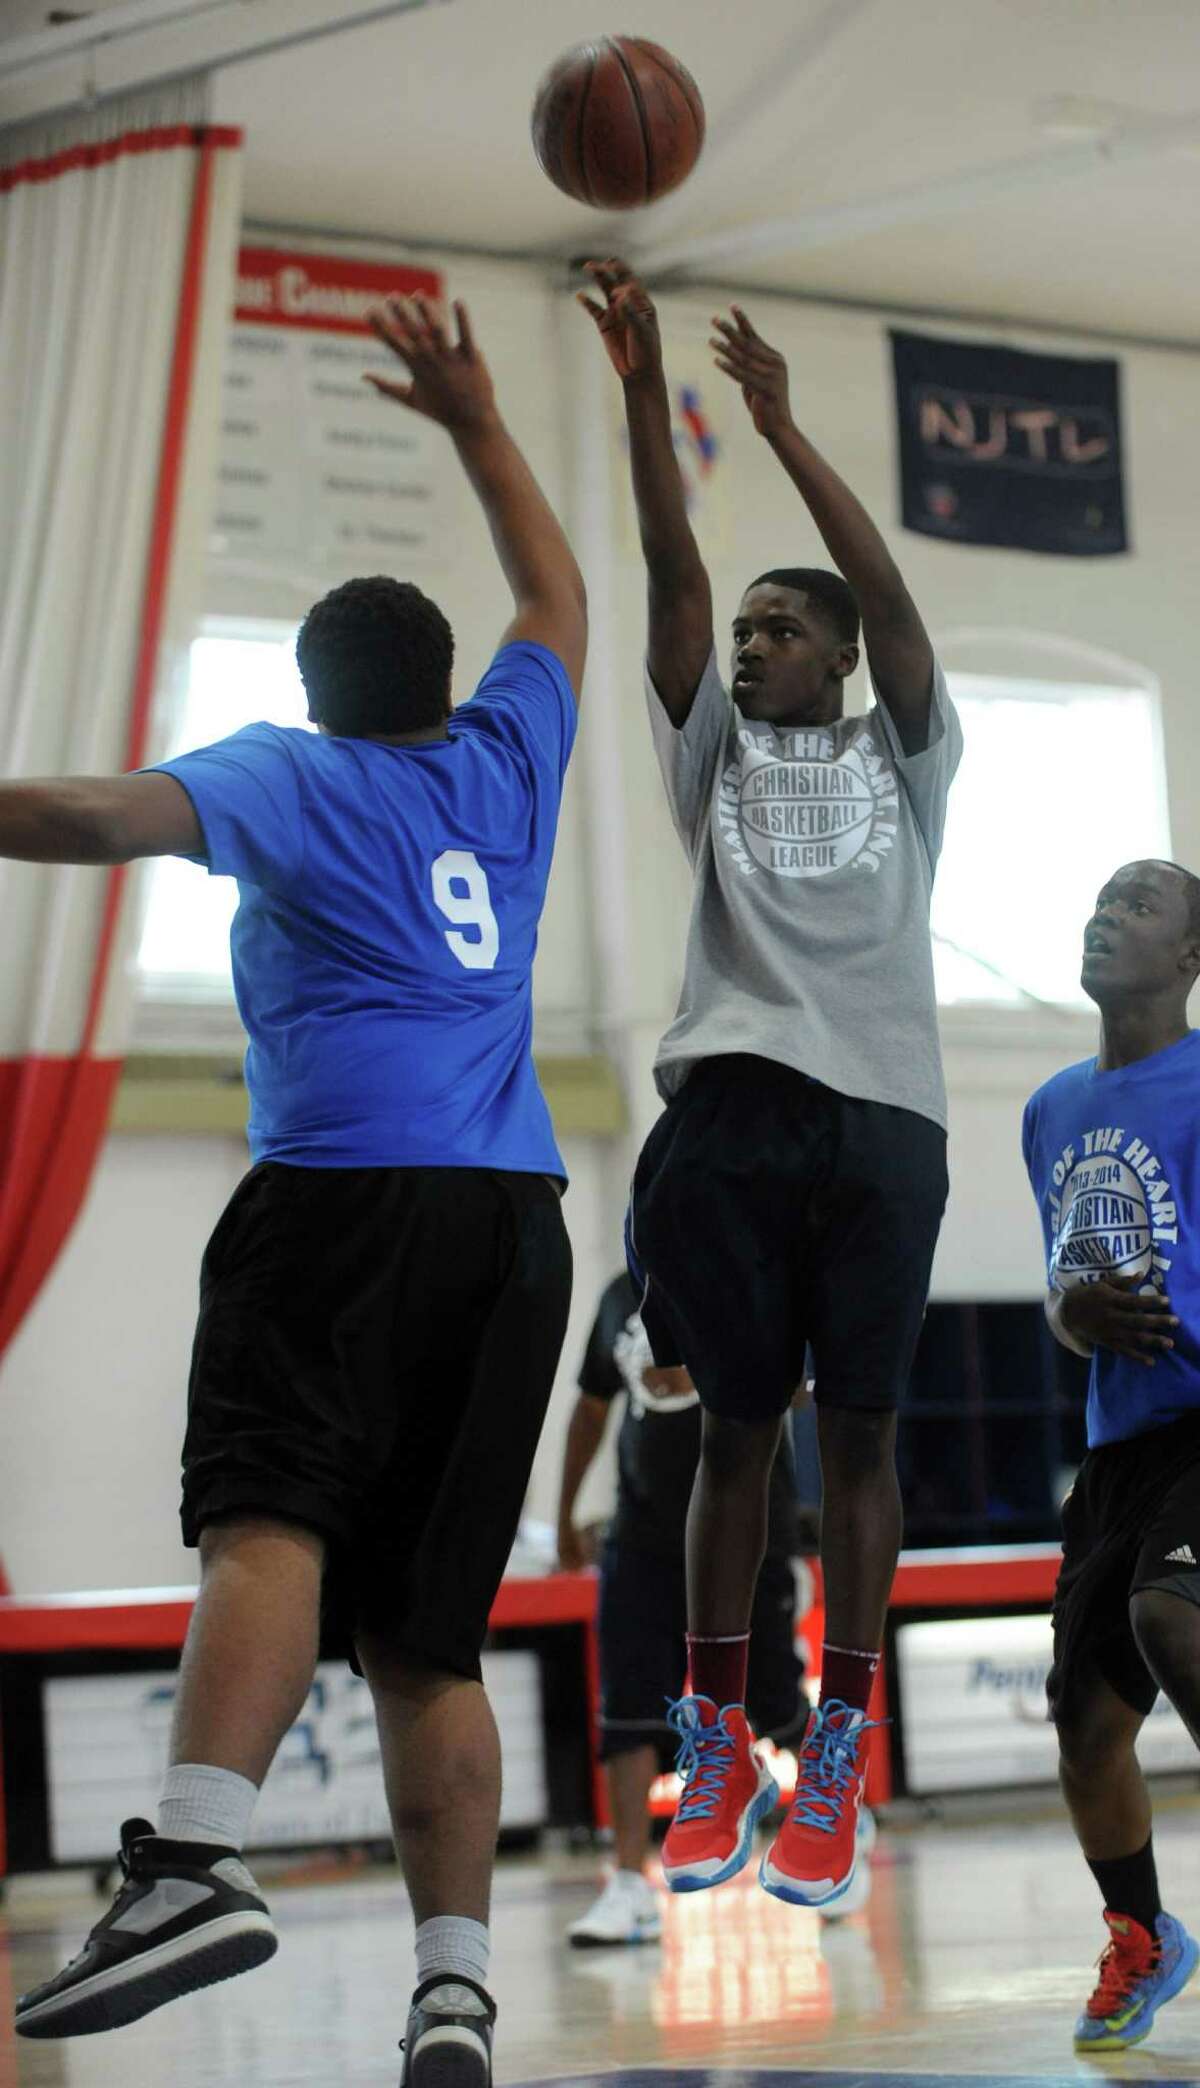 Ty Hubbard, 14, of Hamden, shoots the ball during the first game of the Christian Basketball League Saturday Sept. 14, 2013 at the Cardinal Shehan Center in Bridgeport, Conn.